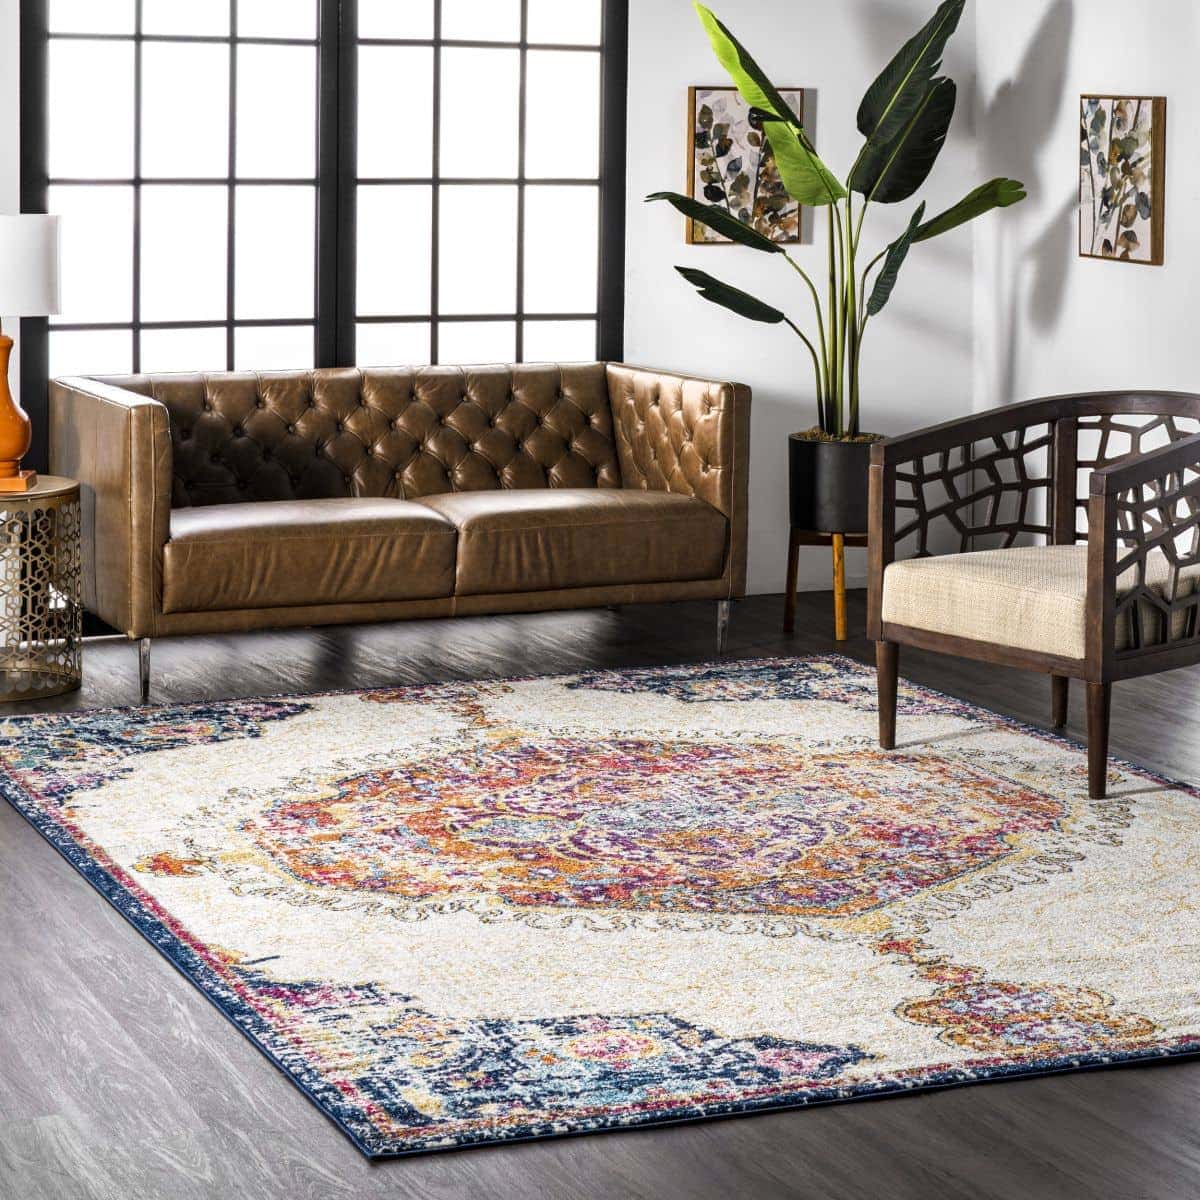 25 Gorgeous Rugs That Go With Brown Couches, Colorful Living Room Rugs